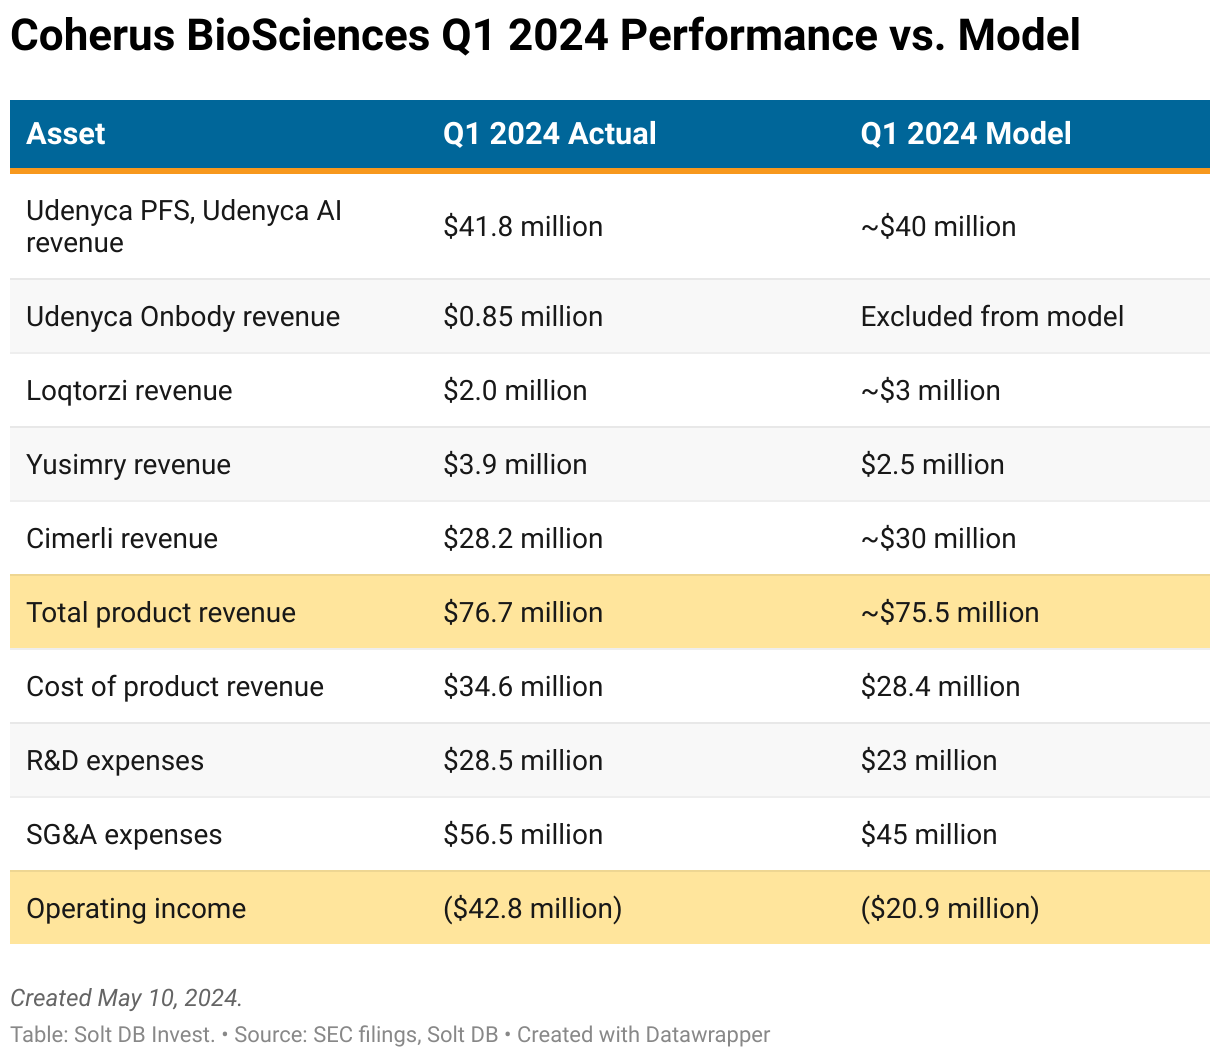 A table showing how Coherus BioSciences performed in Q1 2024 vs. a model.